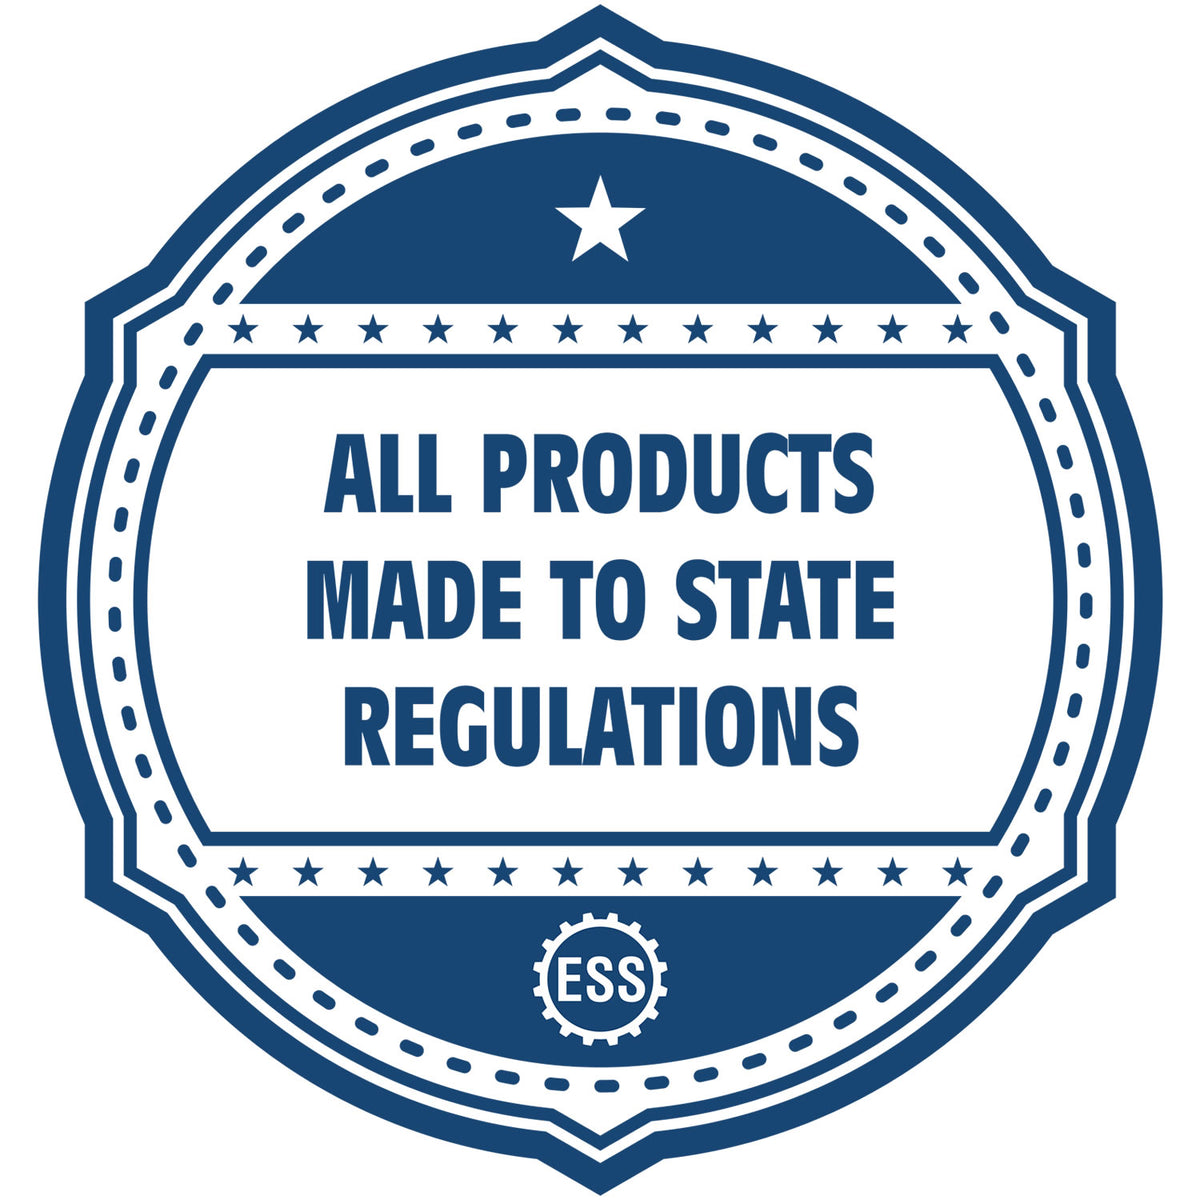 An icon or badge element for the Long Reach Guam PE Seal showing that this product is made in compliance with state regulations.